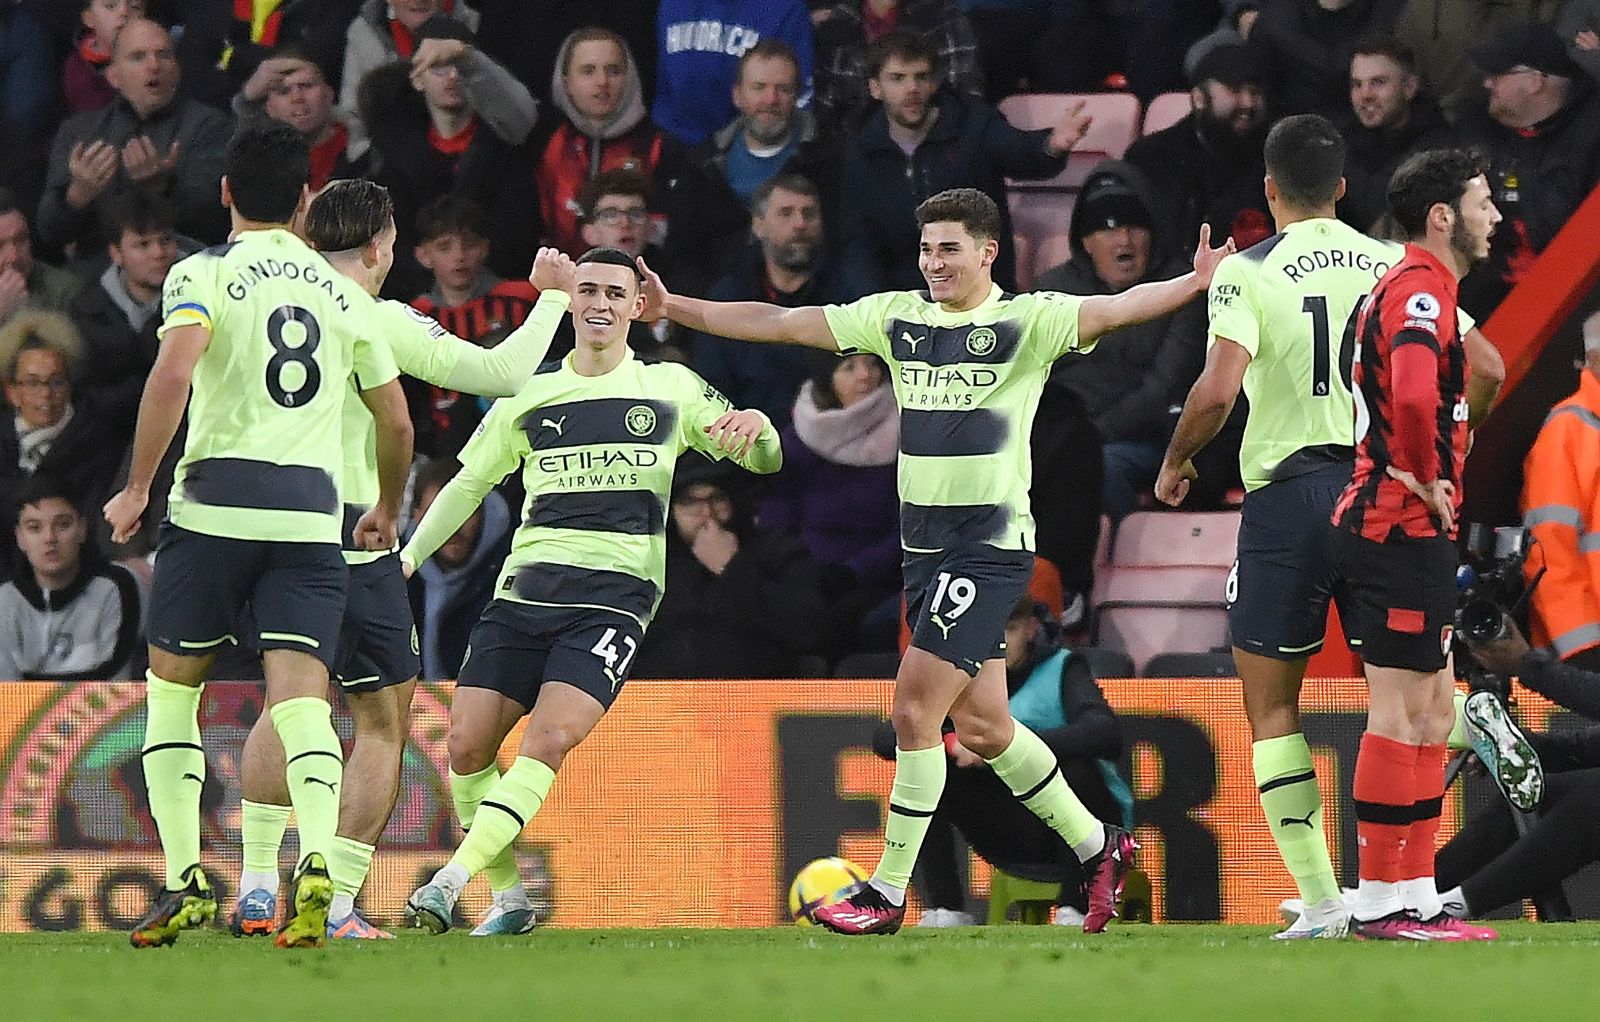 epa10490836 (L-R) Ilkay Gundogan, Jack Grealish, Phil Foden, Julian Alvarez and Rodri celebrate Alvarez' goal against Bournemouth Manchester City during the English Premier League soccer match between AFC Bournemouth vs Manchester City in Bournemouth, Britain, 25 February 2023.  EPA/Vince Mignott EDITORIAL USE ONLY. No use with unauthorized audio, video, data, fixture lists, club/league logos or 'live' services. Online in-match use limited to 120 images, no video emulation. No use in betting, games or single club/league/player publications